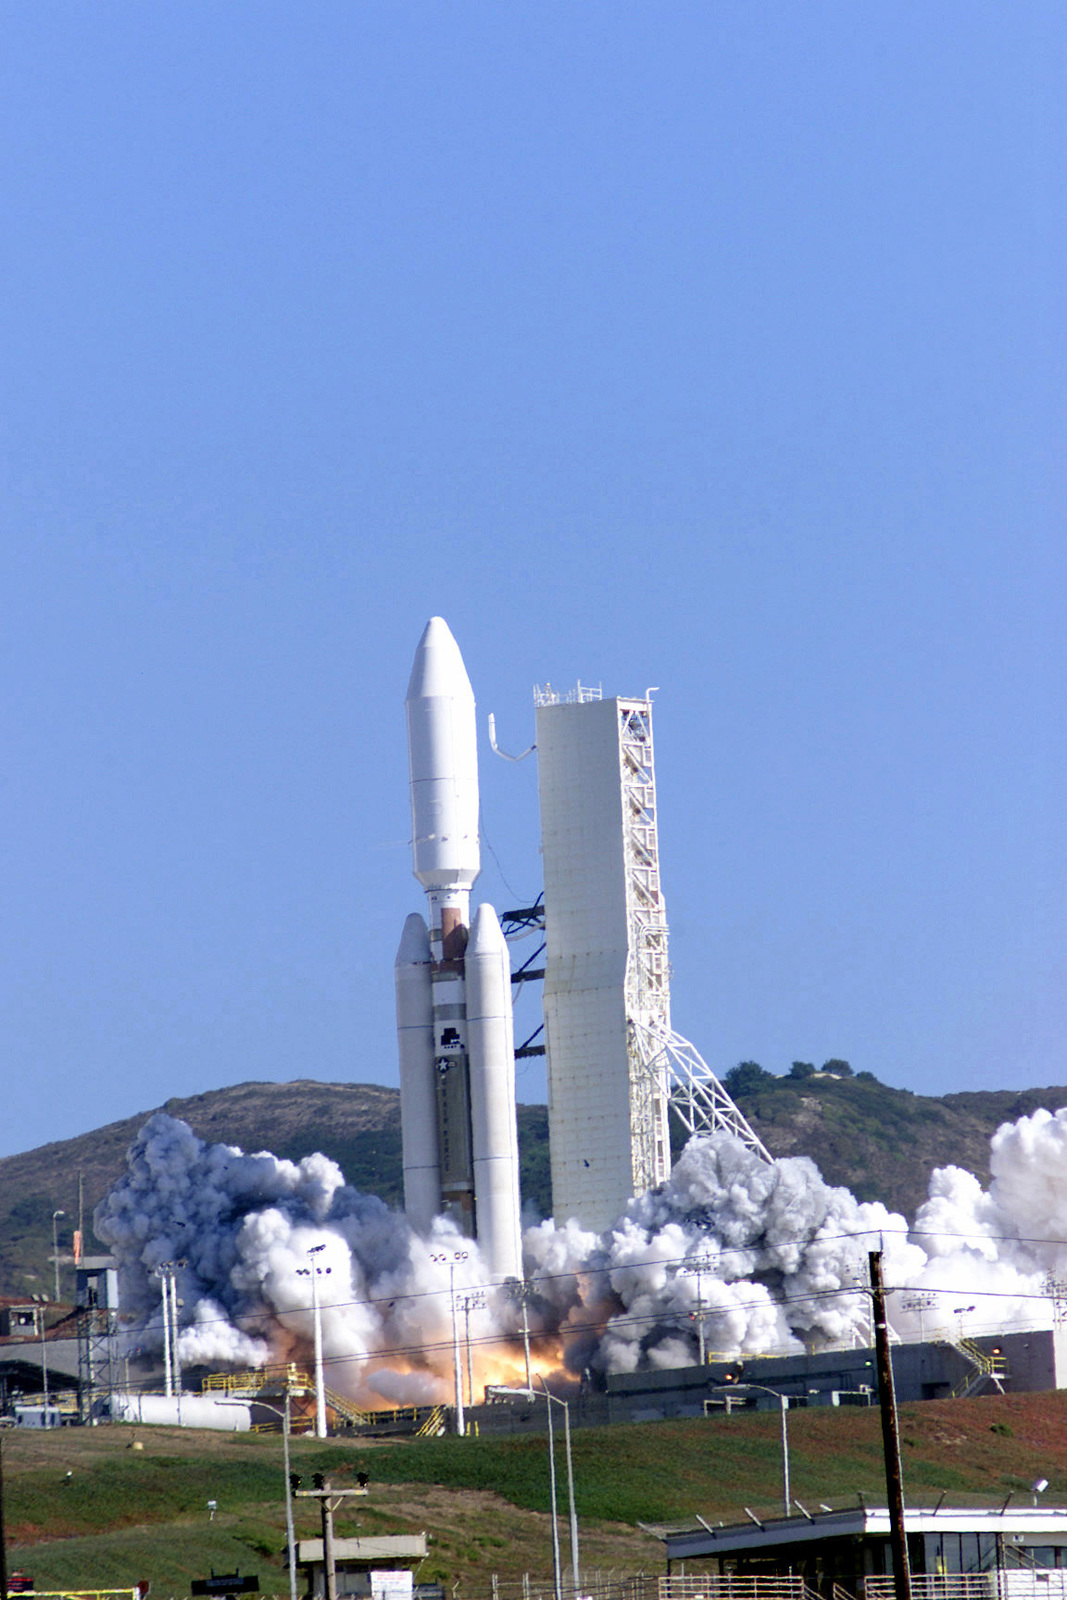 Team Vandenberg launched a Titan IVB rocket from Space Launch Complex